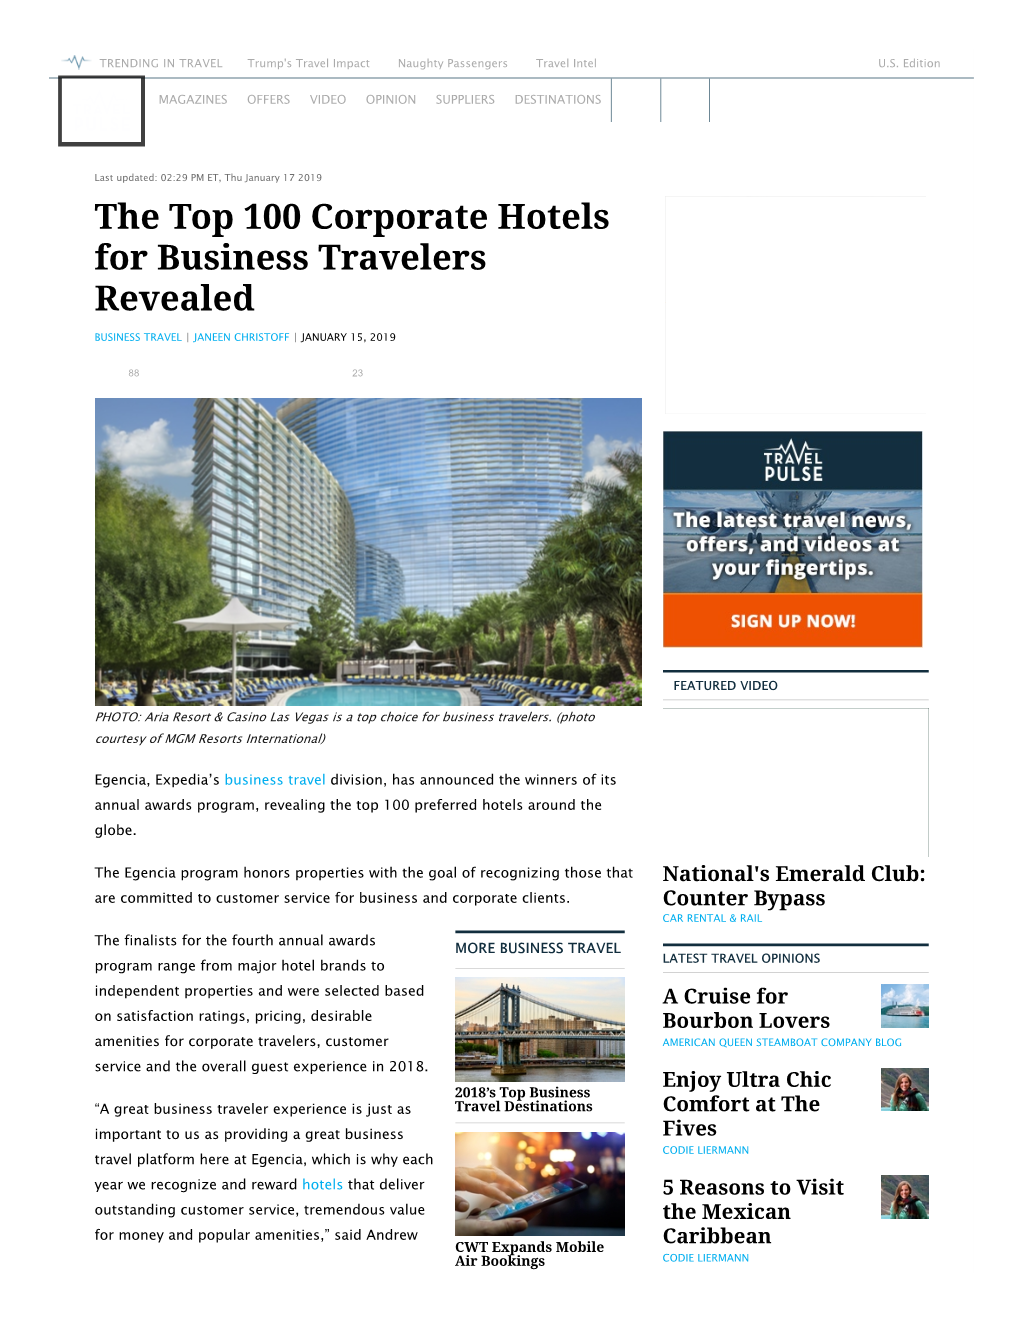 The Top 100 Corporate Hotels for Business Travelers Revealed